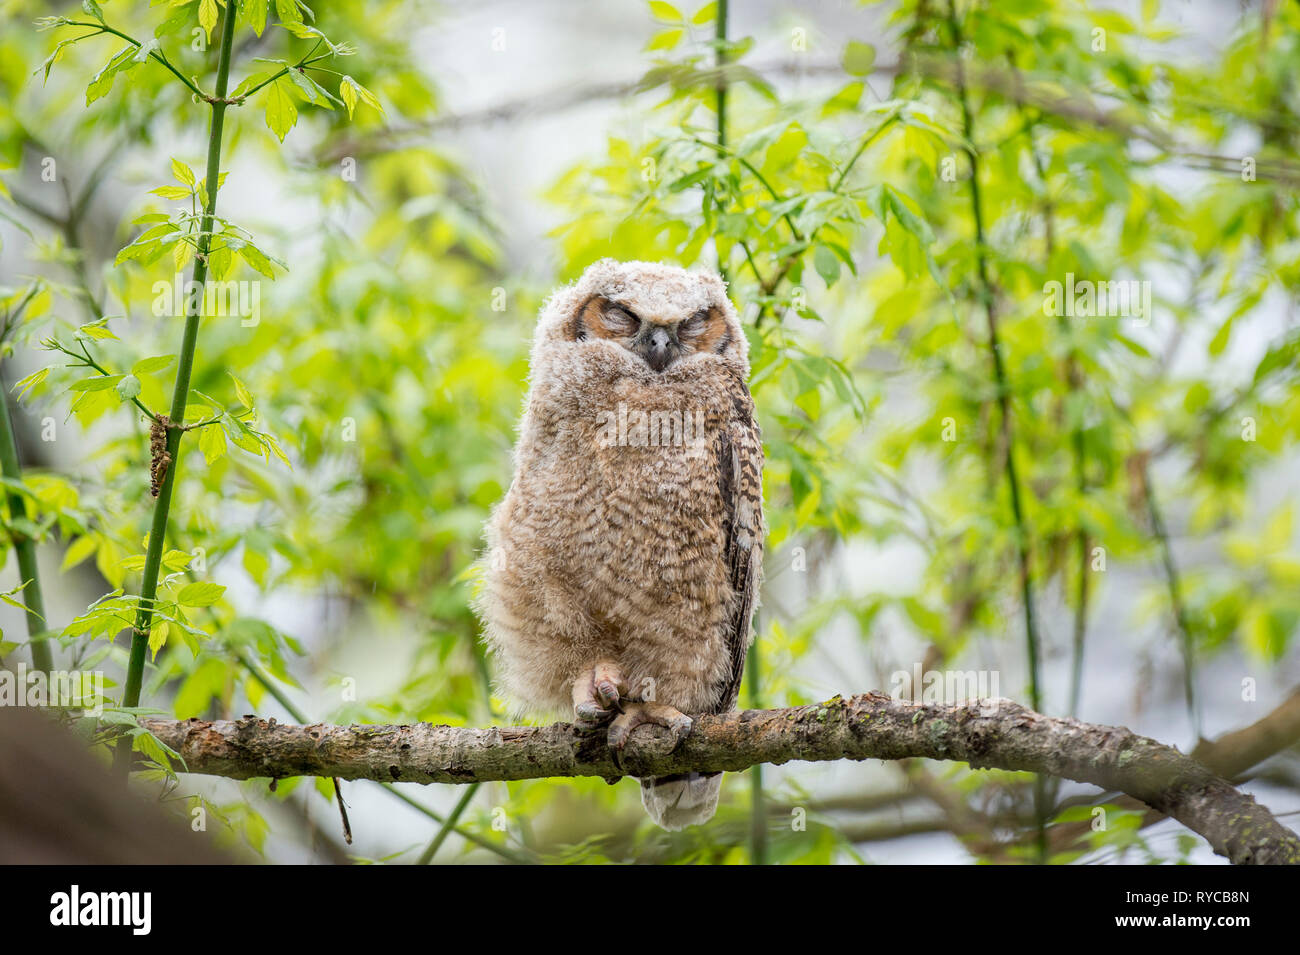 A young Great-horned Owlet sleeps on a small branch in the forest of fresh spring growth. Stock Photo